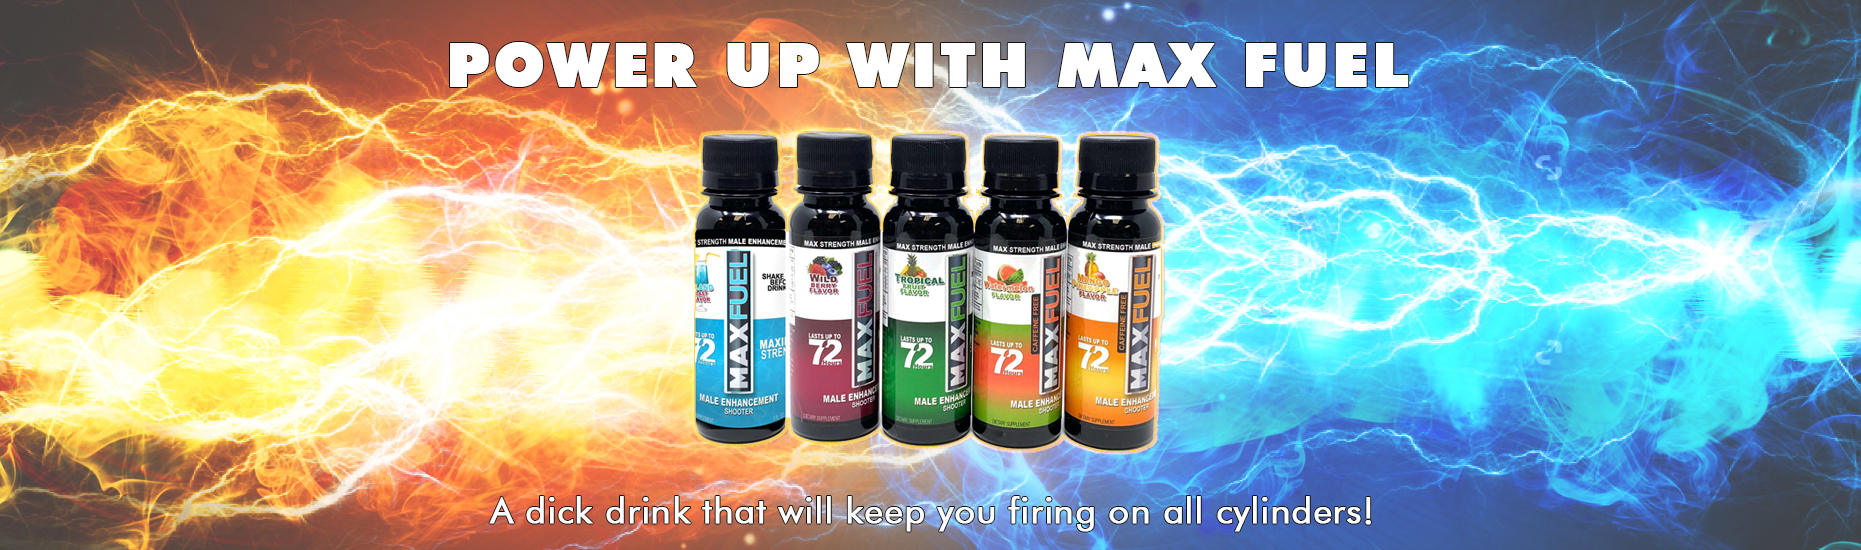 Power Up with Max Fuel!